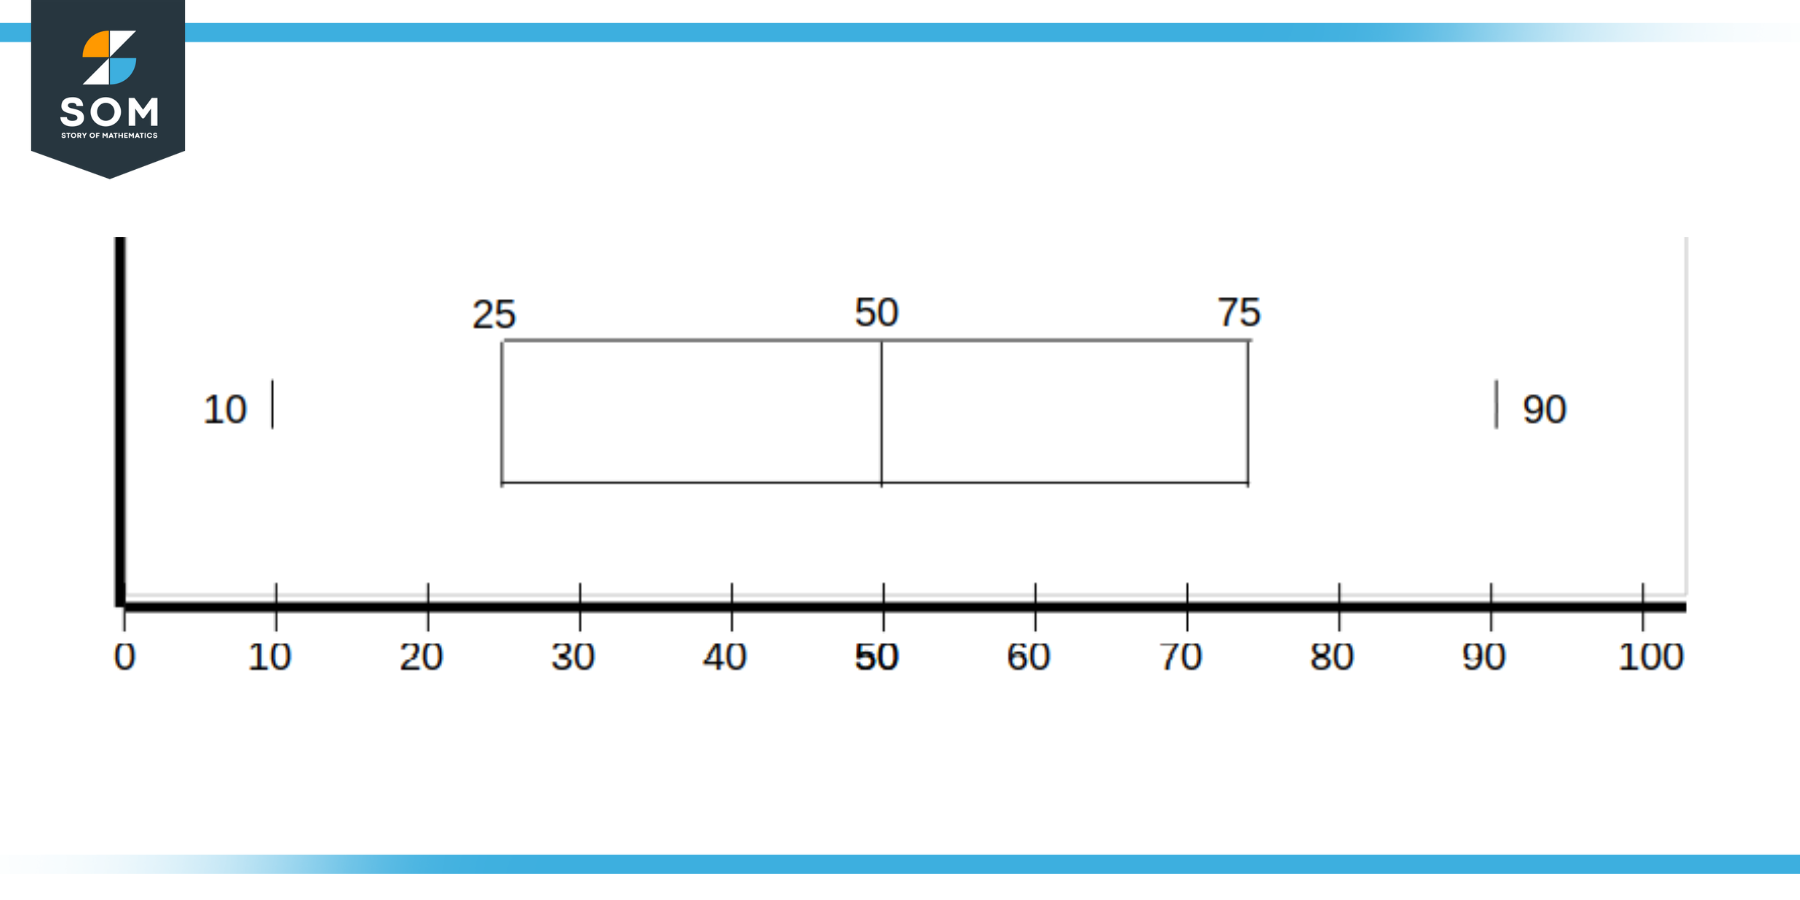 Constructing the Box using Lower Quartile and Higher Quartile Bars